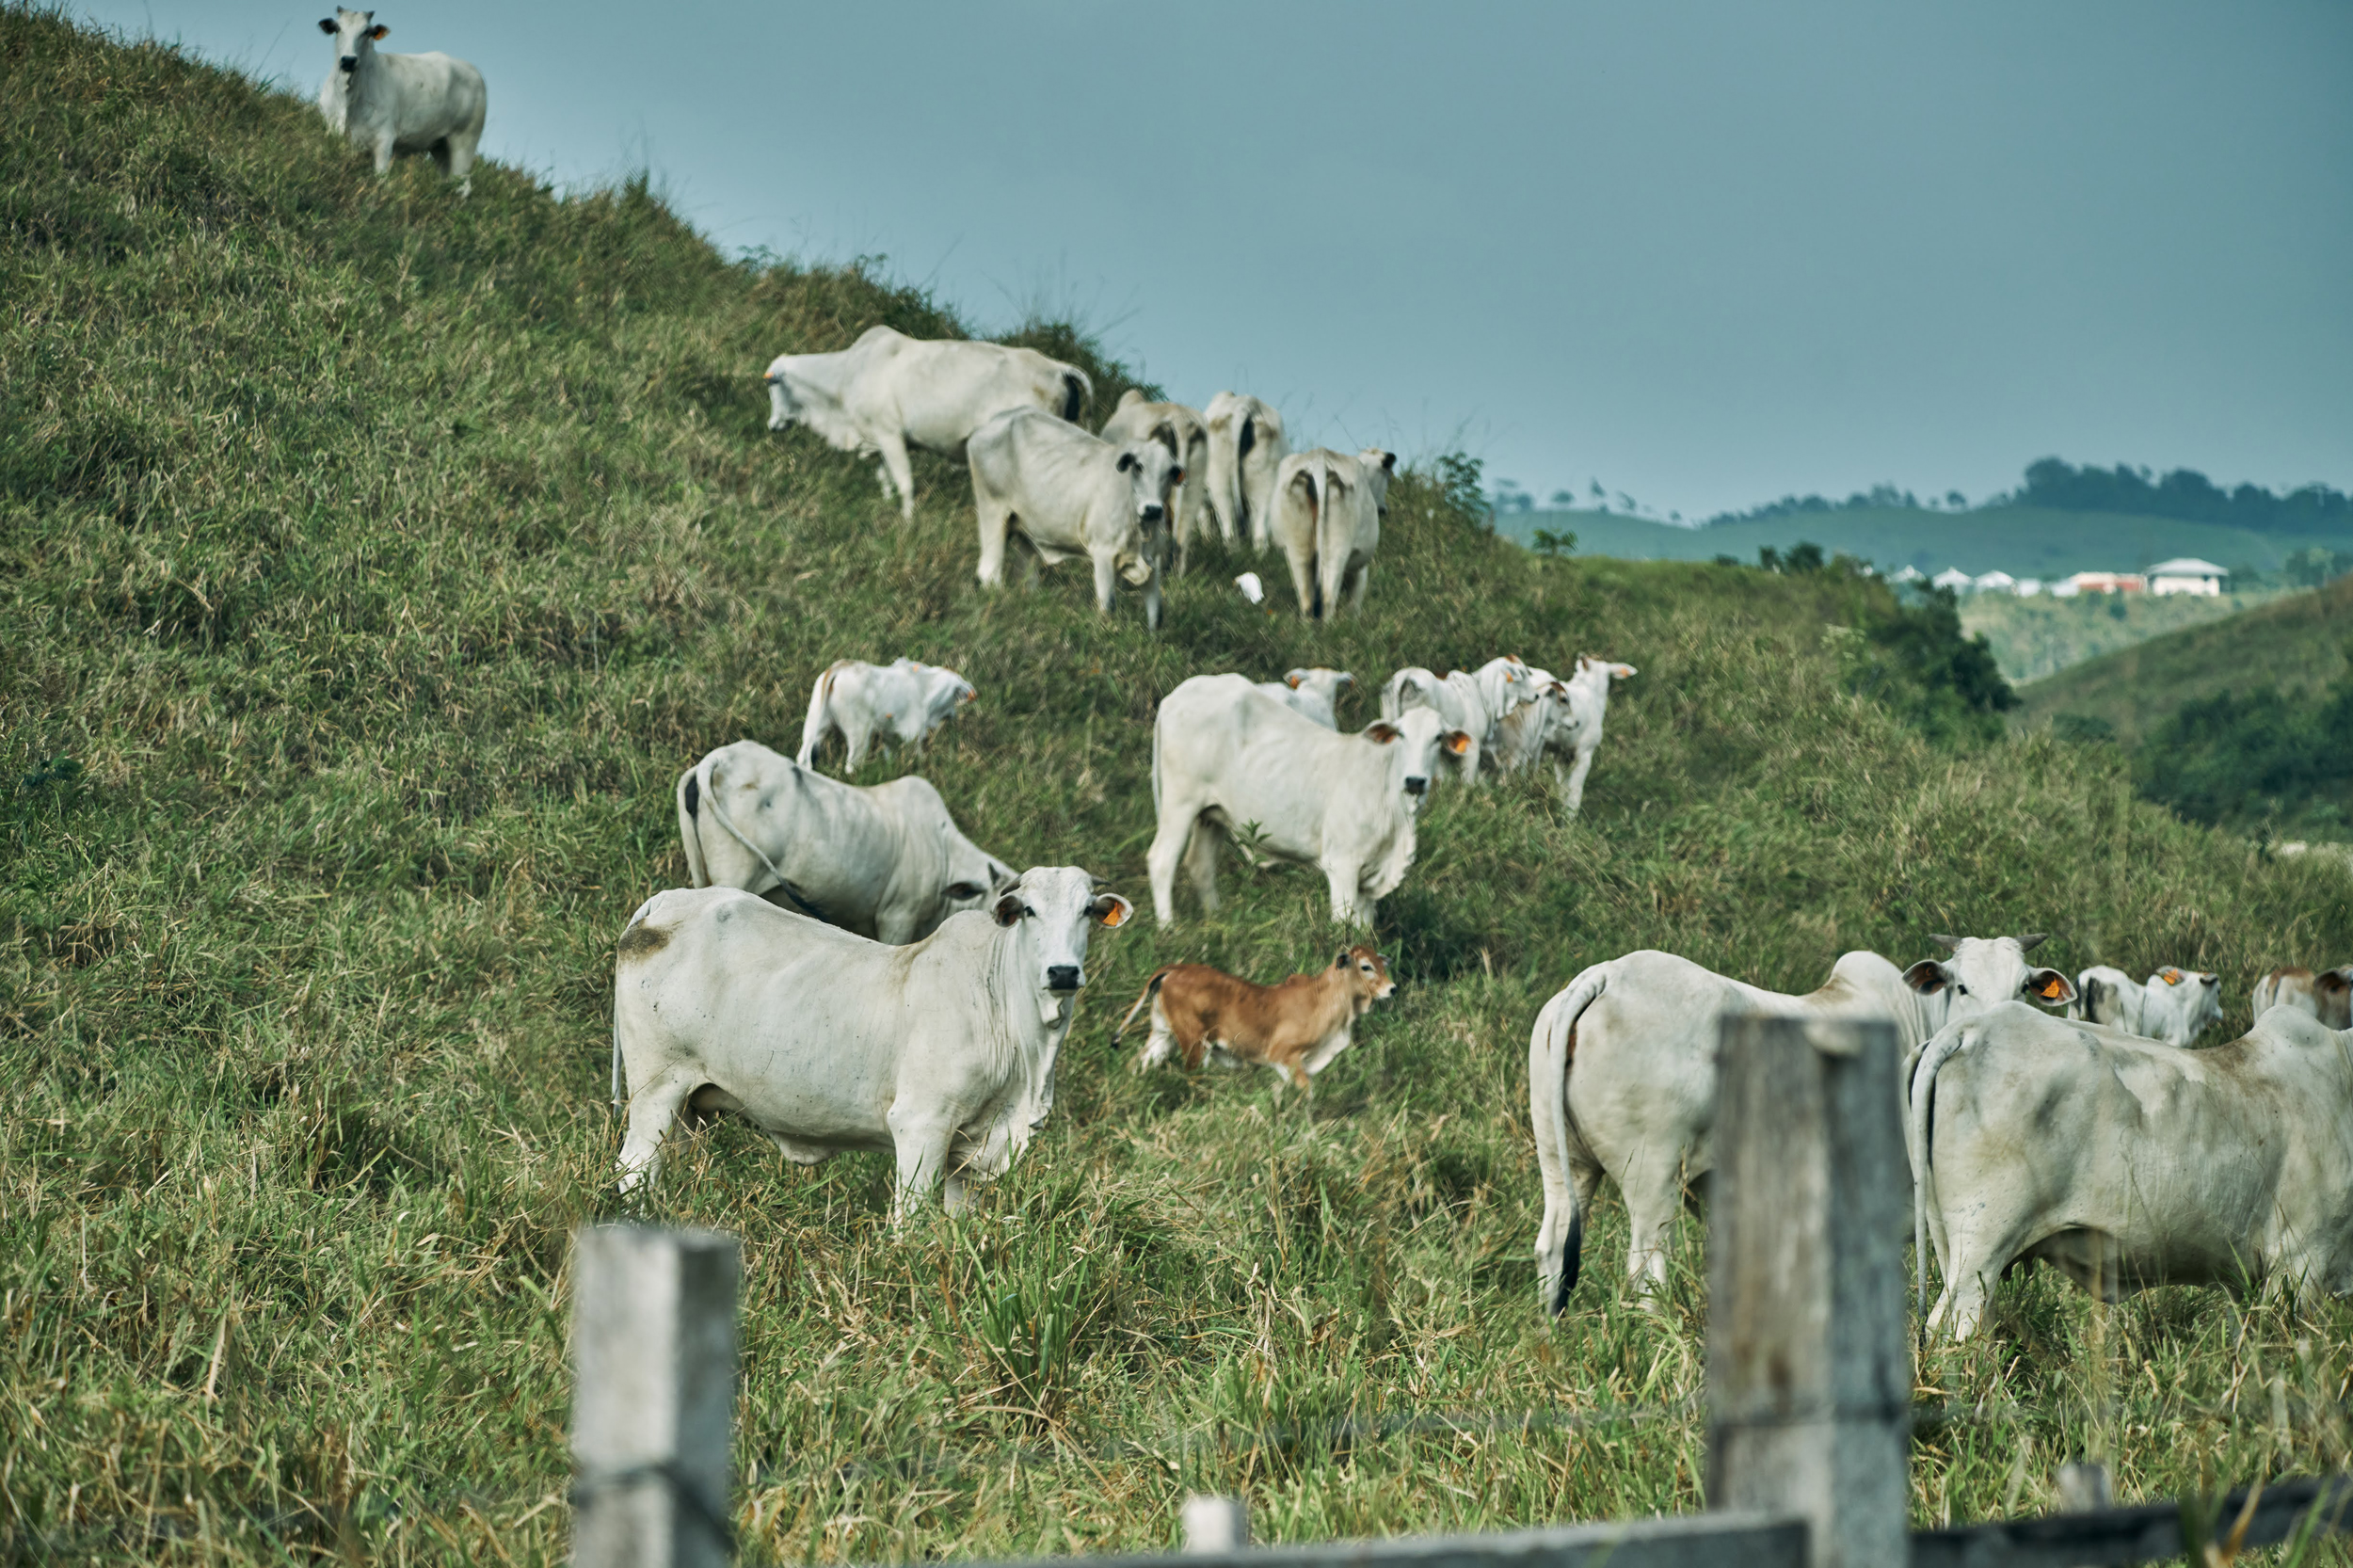 Cattle graze on pasture near the border of one of Belize's largest patches of protected forest. From 1990 to 2020, the country lost about 20 percent of its forest cover, largely to agricultural development, according to the U.N. Food and Agriculture Organization. Credit: Kevin Quischan